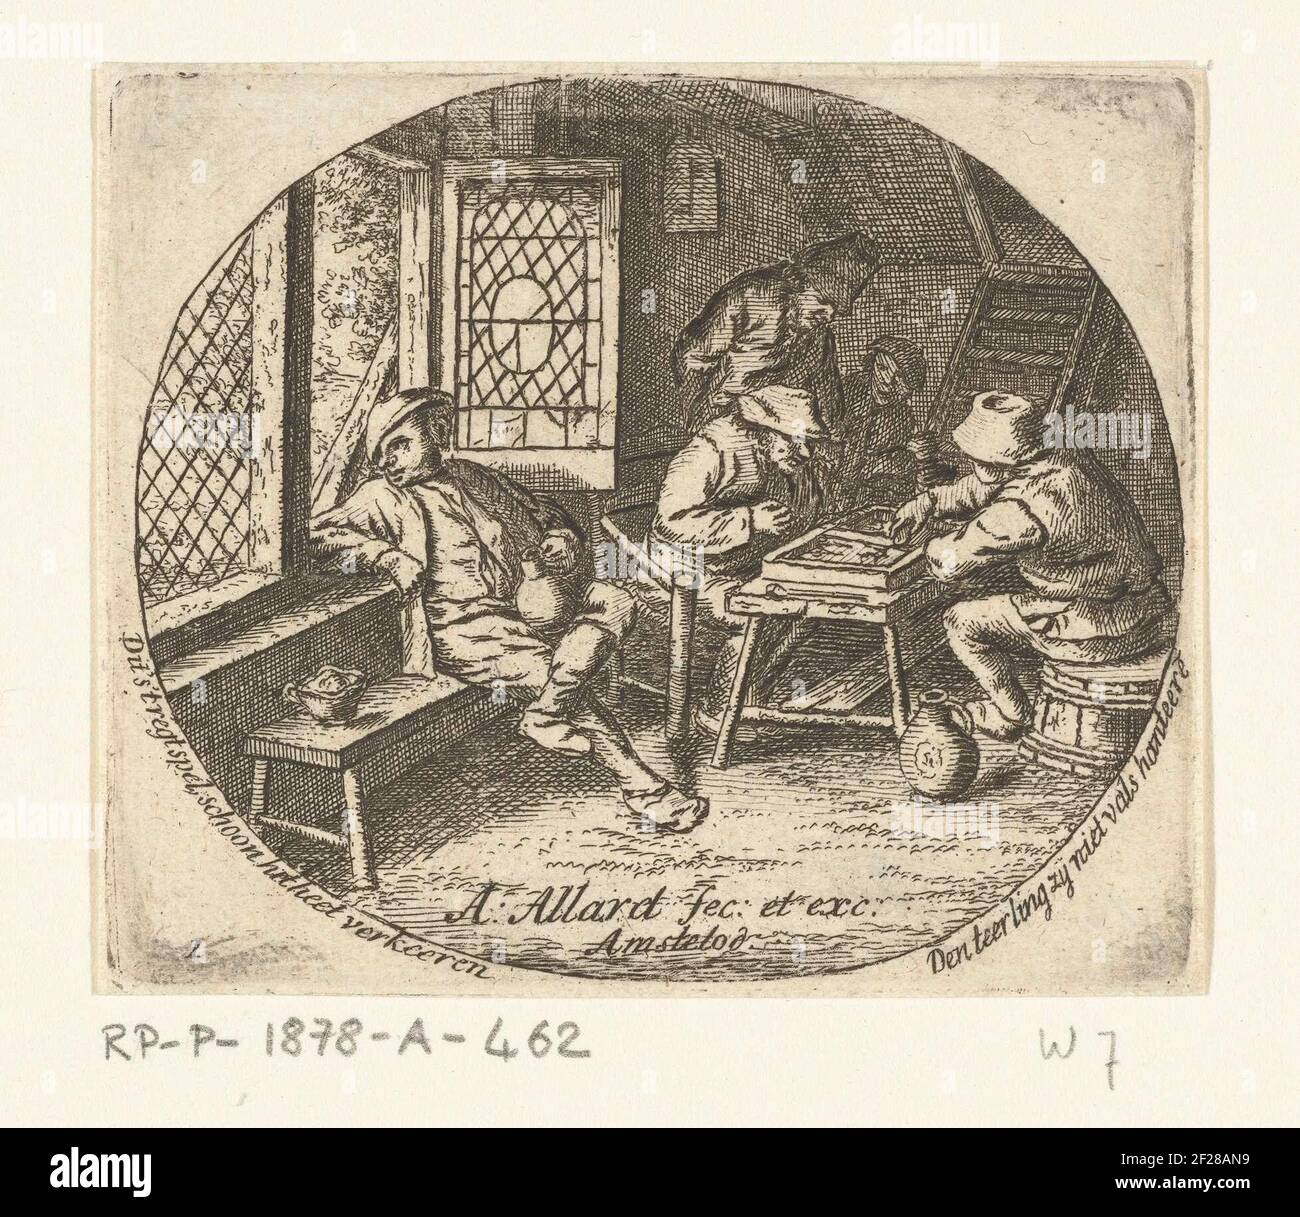 Boereninterieur met tric-trac (backgammon) spelers.Farmers interior with two men who play tric-trac at a table and at the window a drinking man, in an oval. With inscription in Dutch. Stock Photo